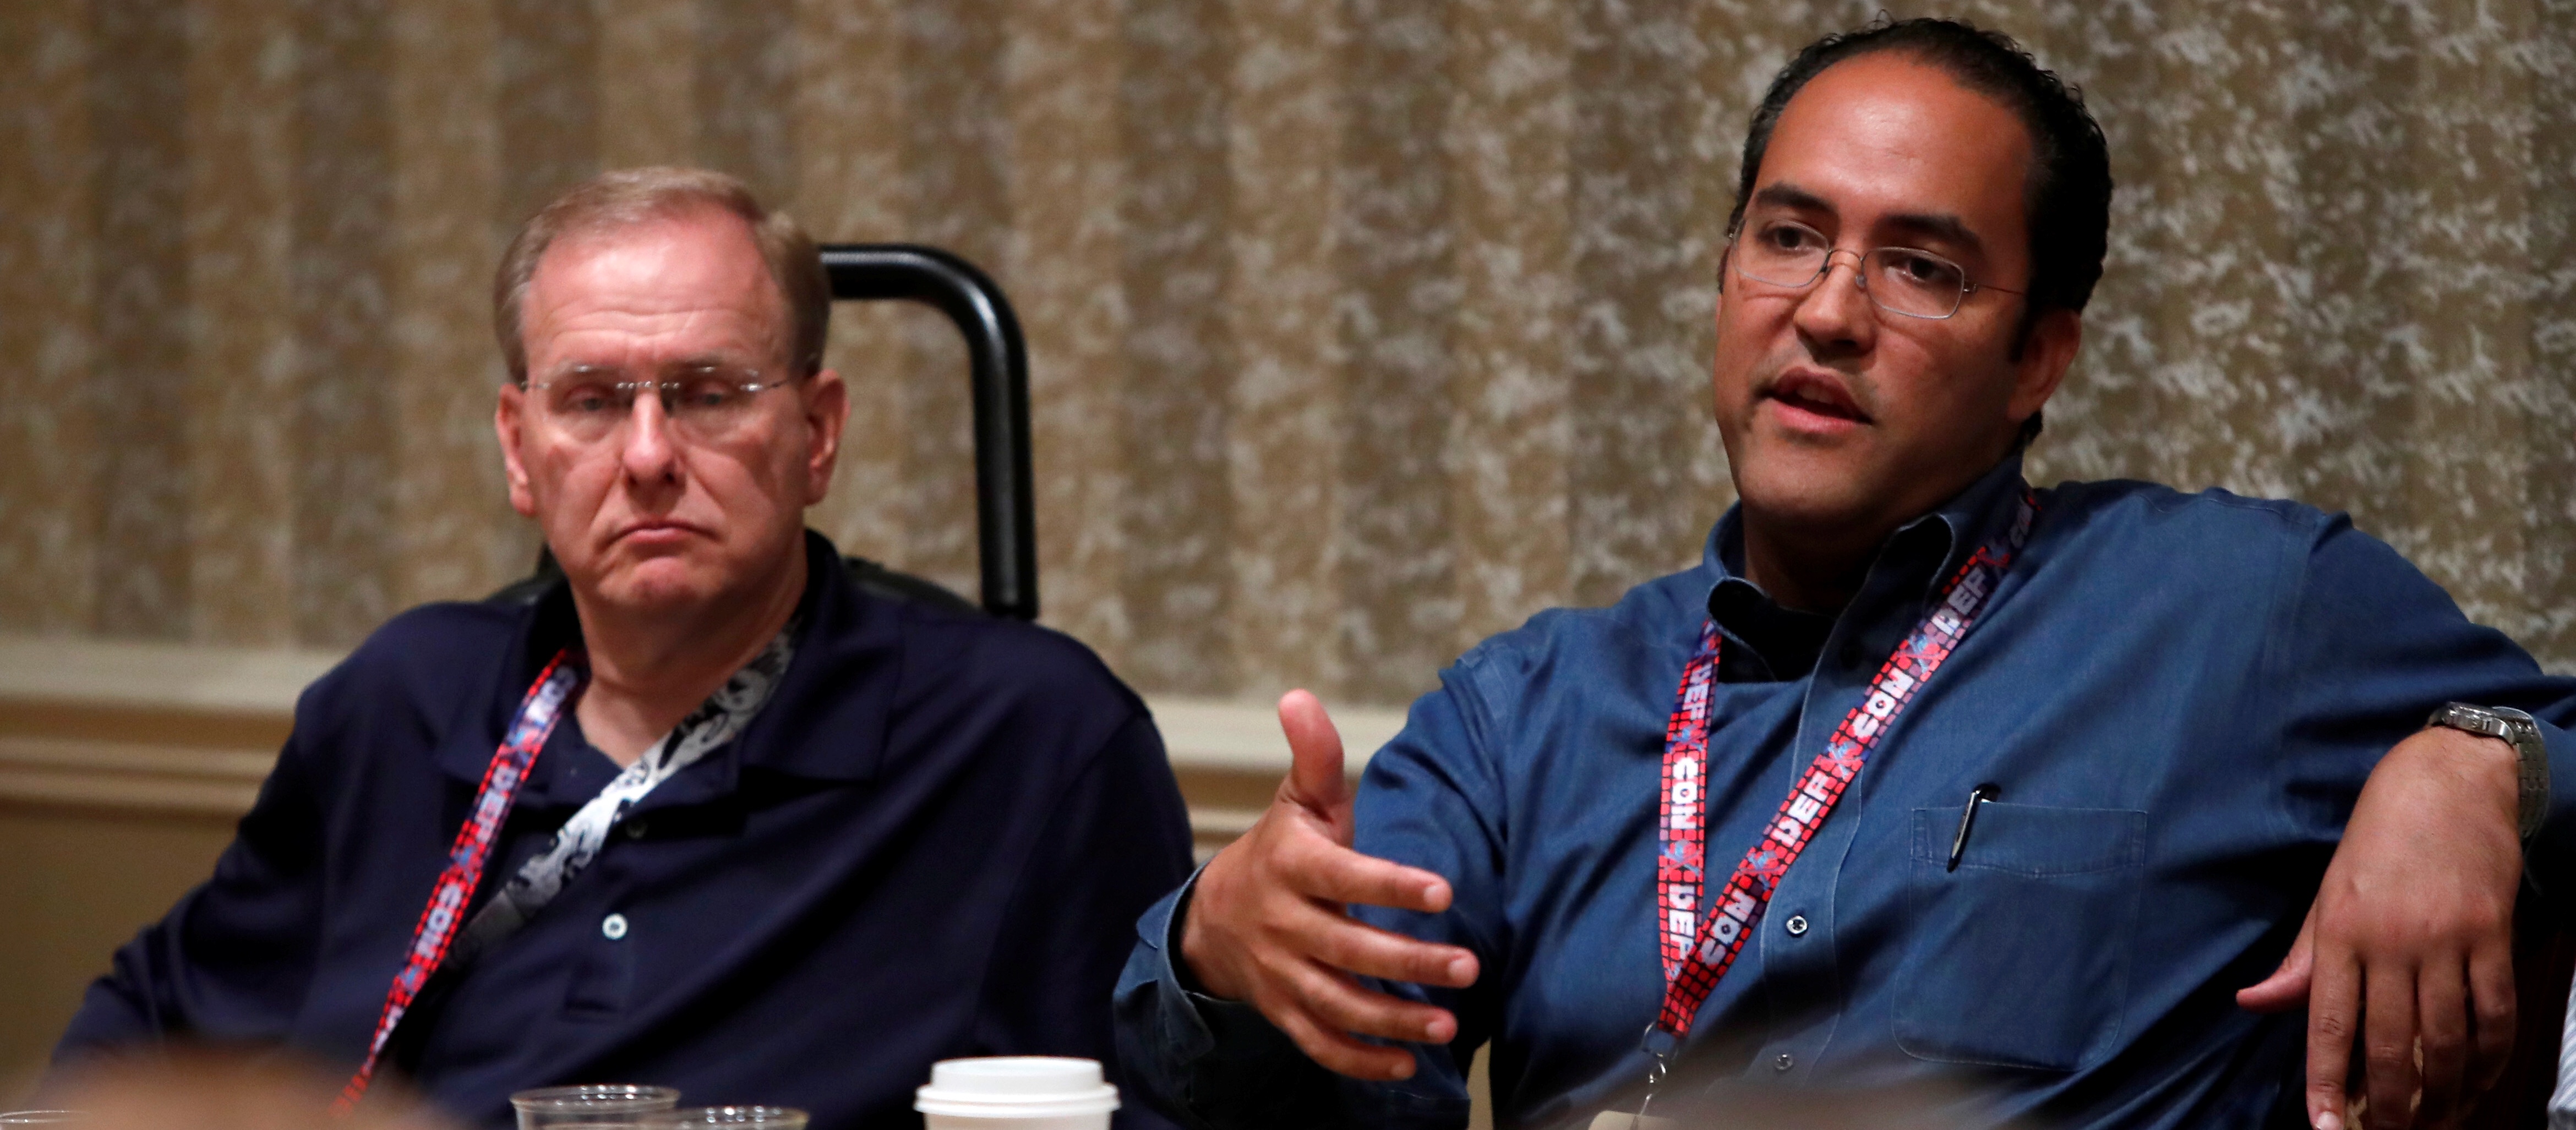 U.S. Congressmen James Langevin (D-RI) and Will Hurd (R-Tex) respond to questions during a session at the Def Con hacker convention in Las Vegas, Nevada, U.S. on July 29, 2017. REUTERS/Steve Marcus 